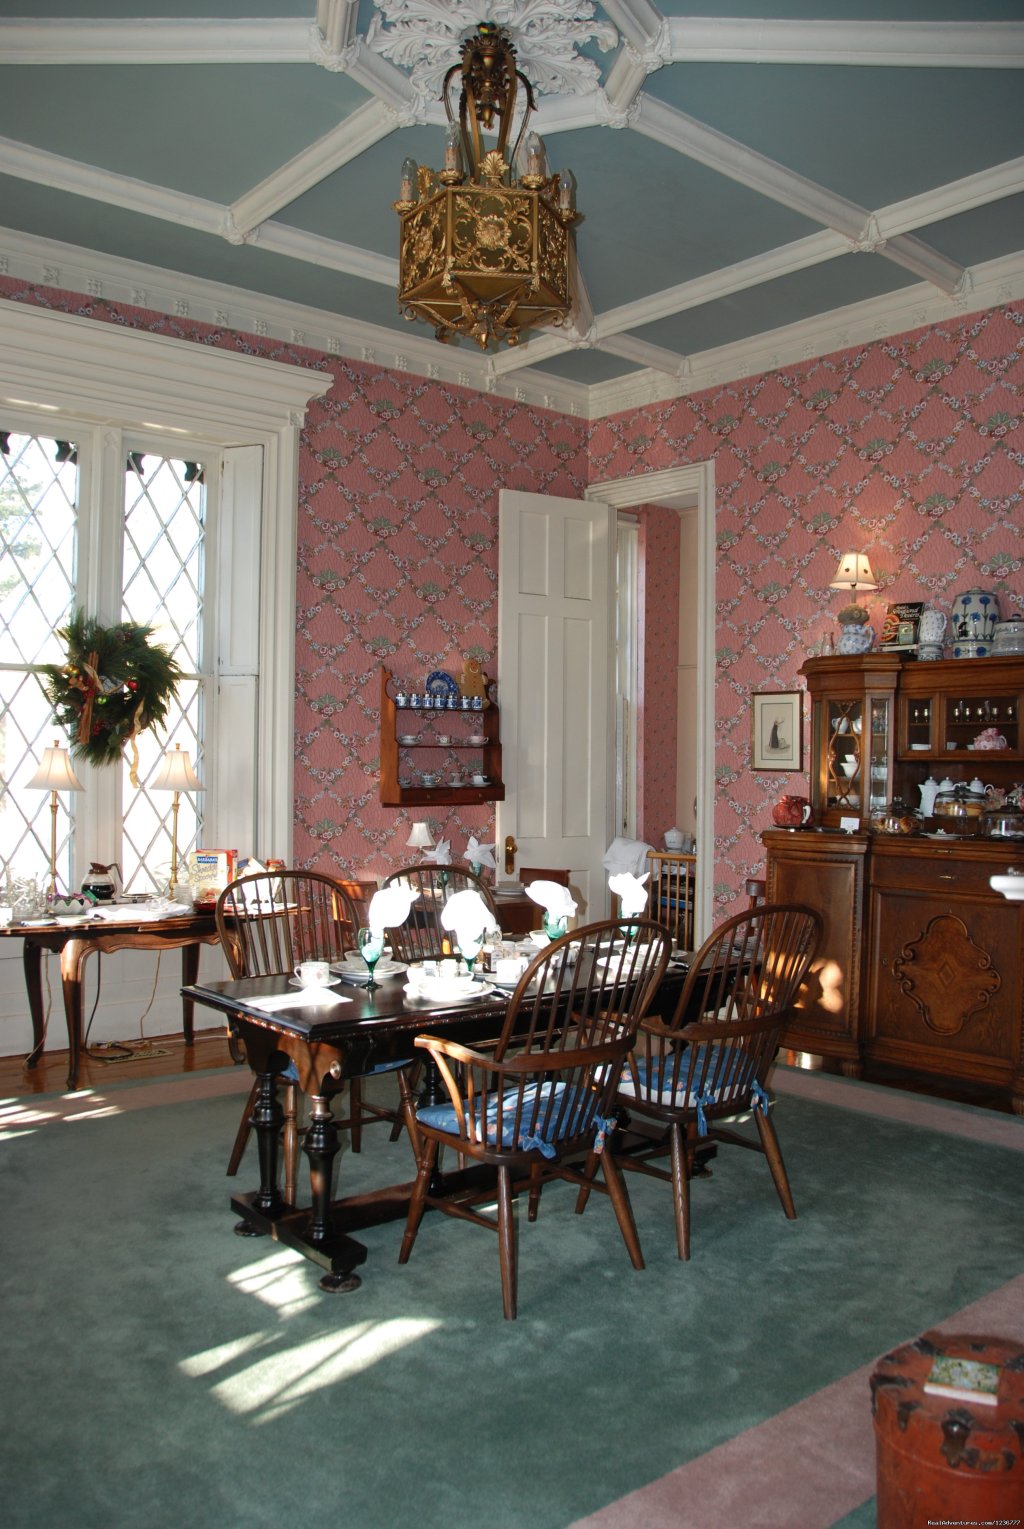 Dining Room at the Inn at Woodhaven | Inn at Woodhaven a Romantic Bed and Breakfast i | Image #3/10 | 